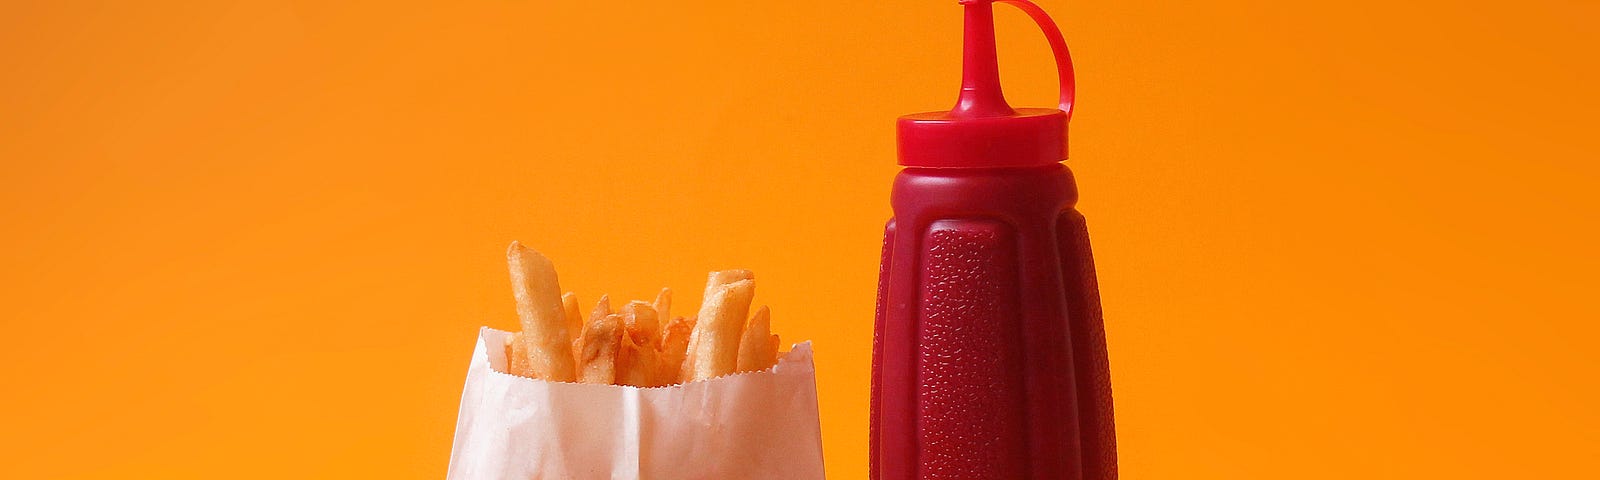 Photo of french fries in a paper wrapper on the left, and a red ketchup bottle on the right. Fast food can contain phthalates.